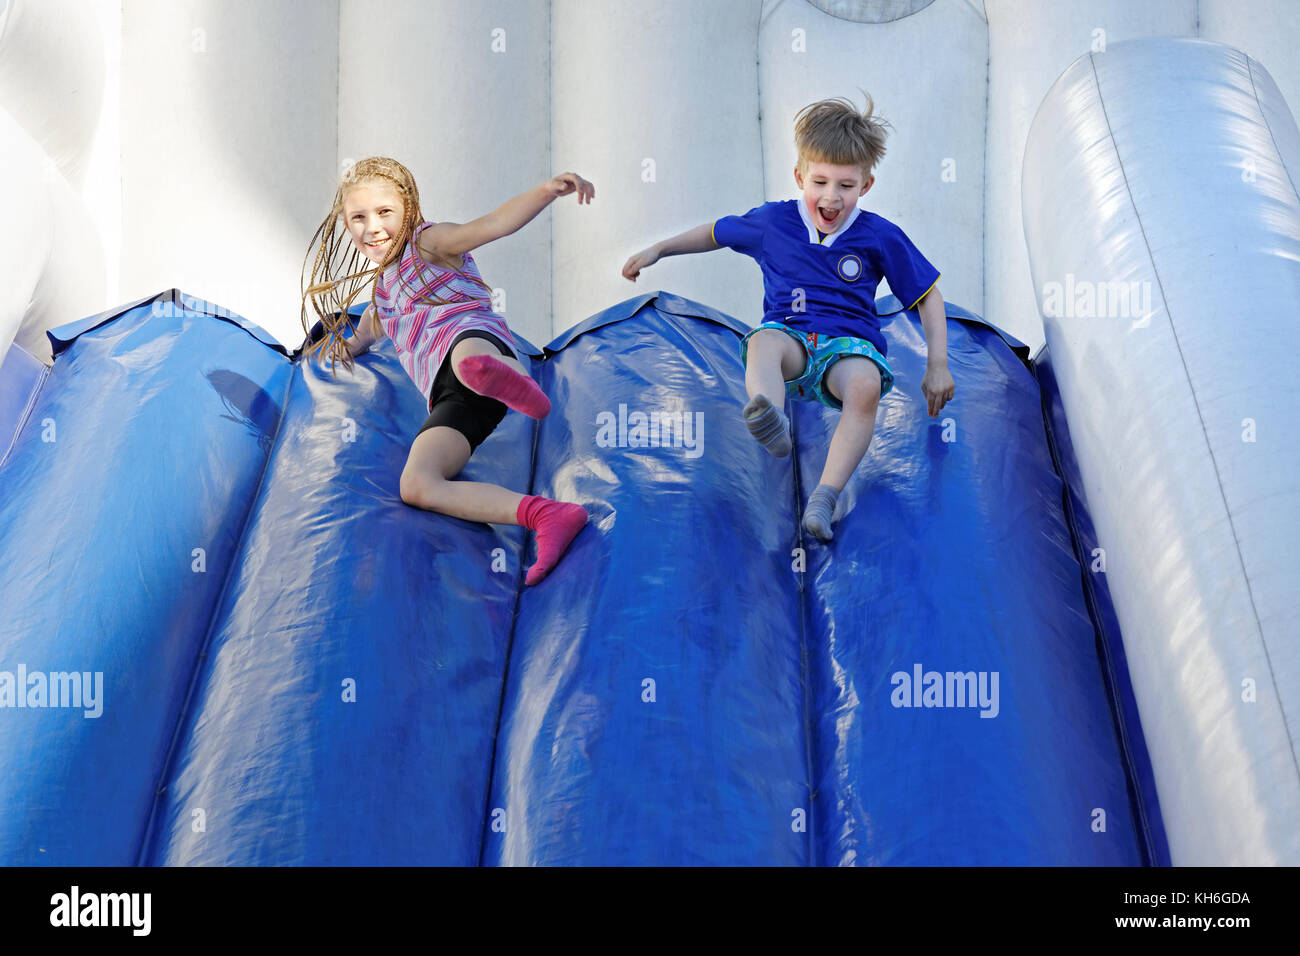 Children grimace and laugh as they roll down the smooth surface of the inflatable attraction Stock Photo